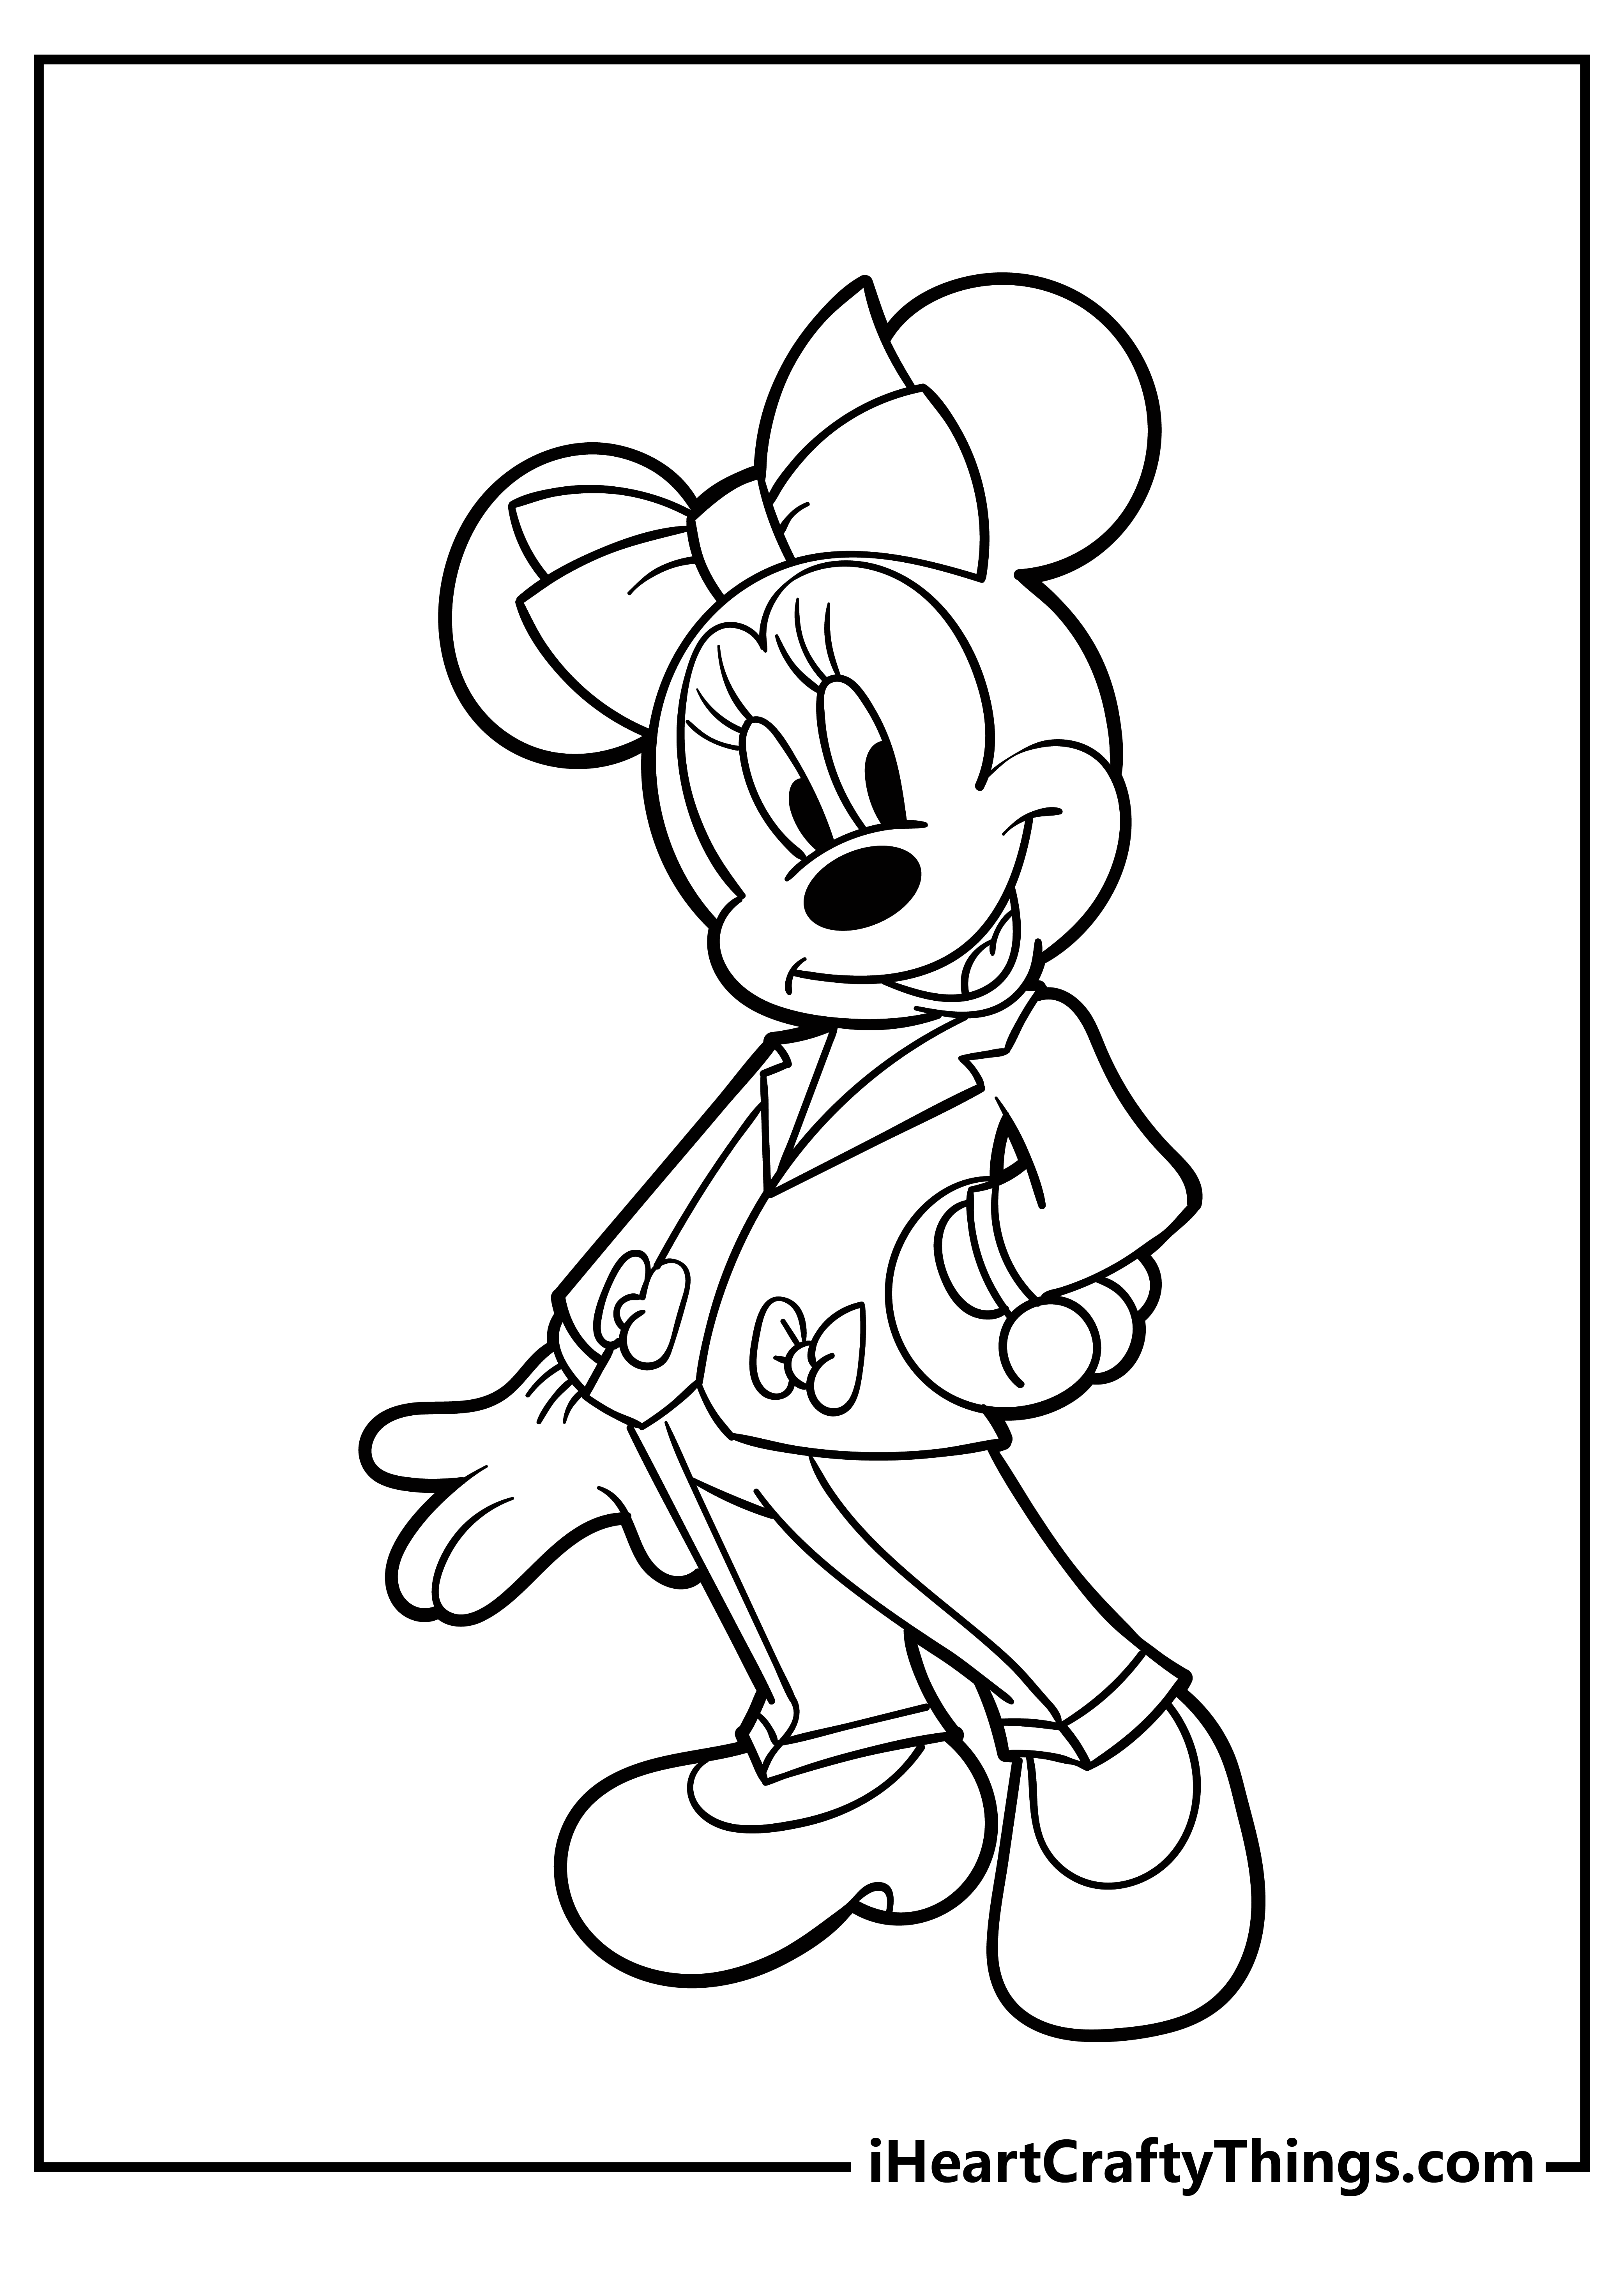 Minnie Mouse Coloring Book for adults free download